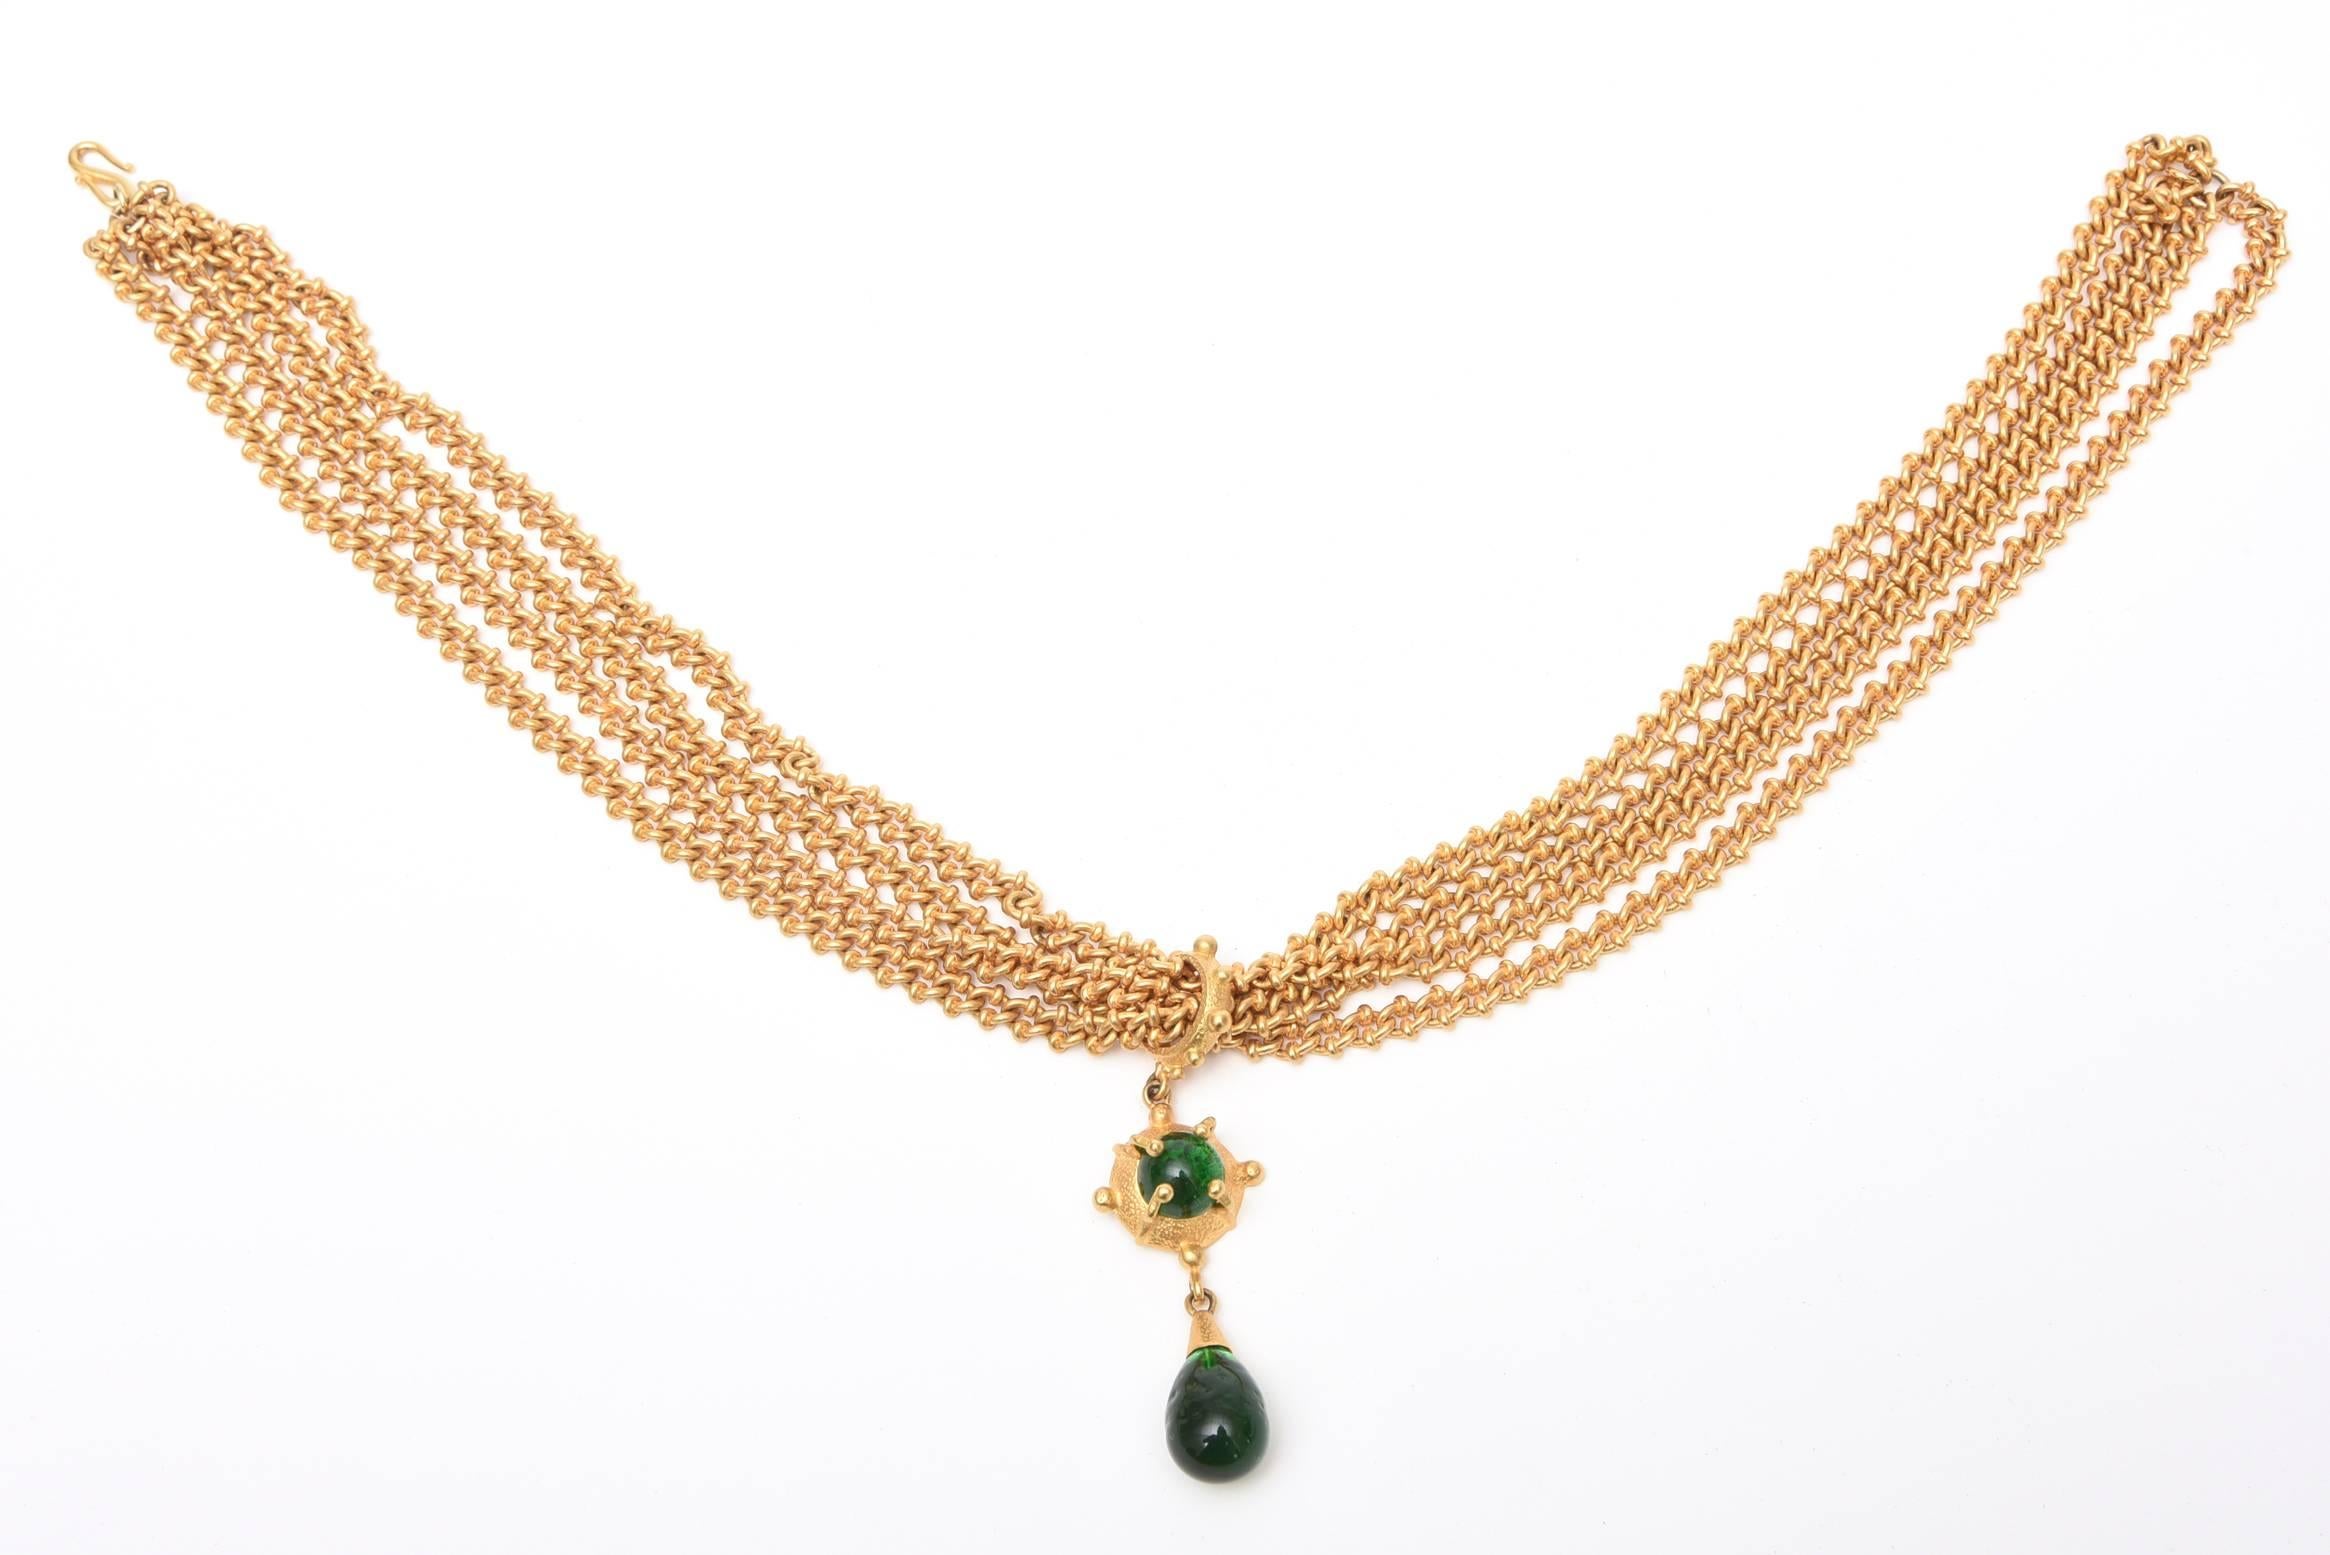 Women's  Andrew Spingarn Gold Plated With Green Glass Sculptural Necklace, Earrings Set For Sale